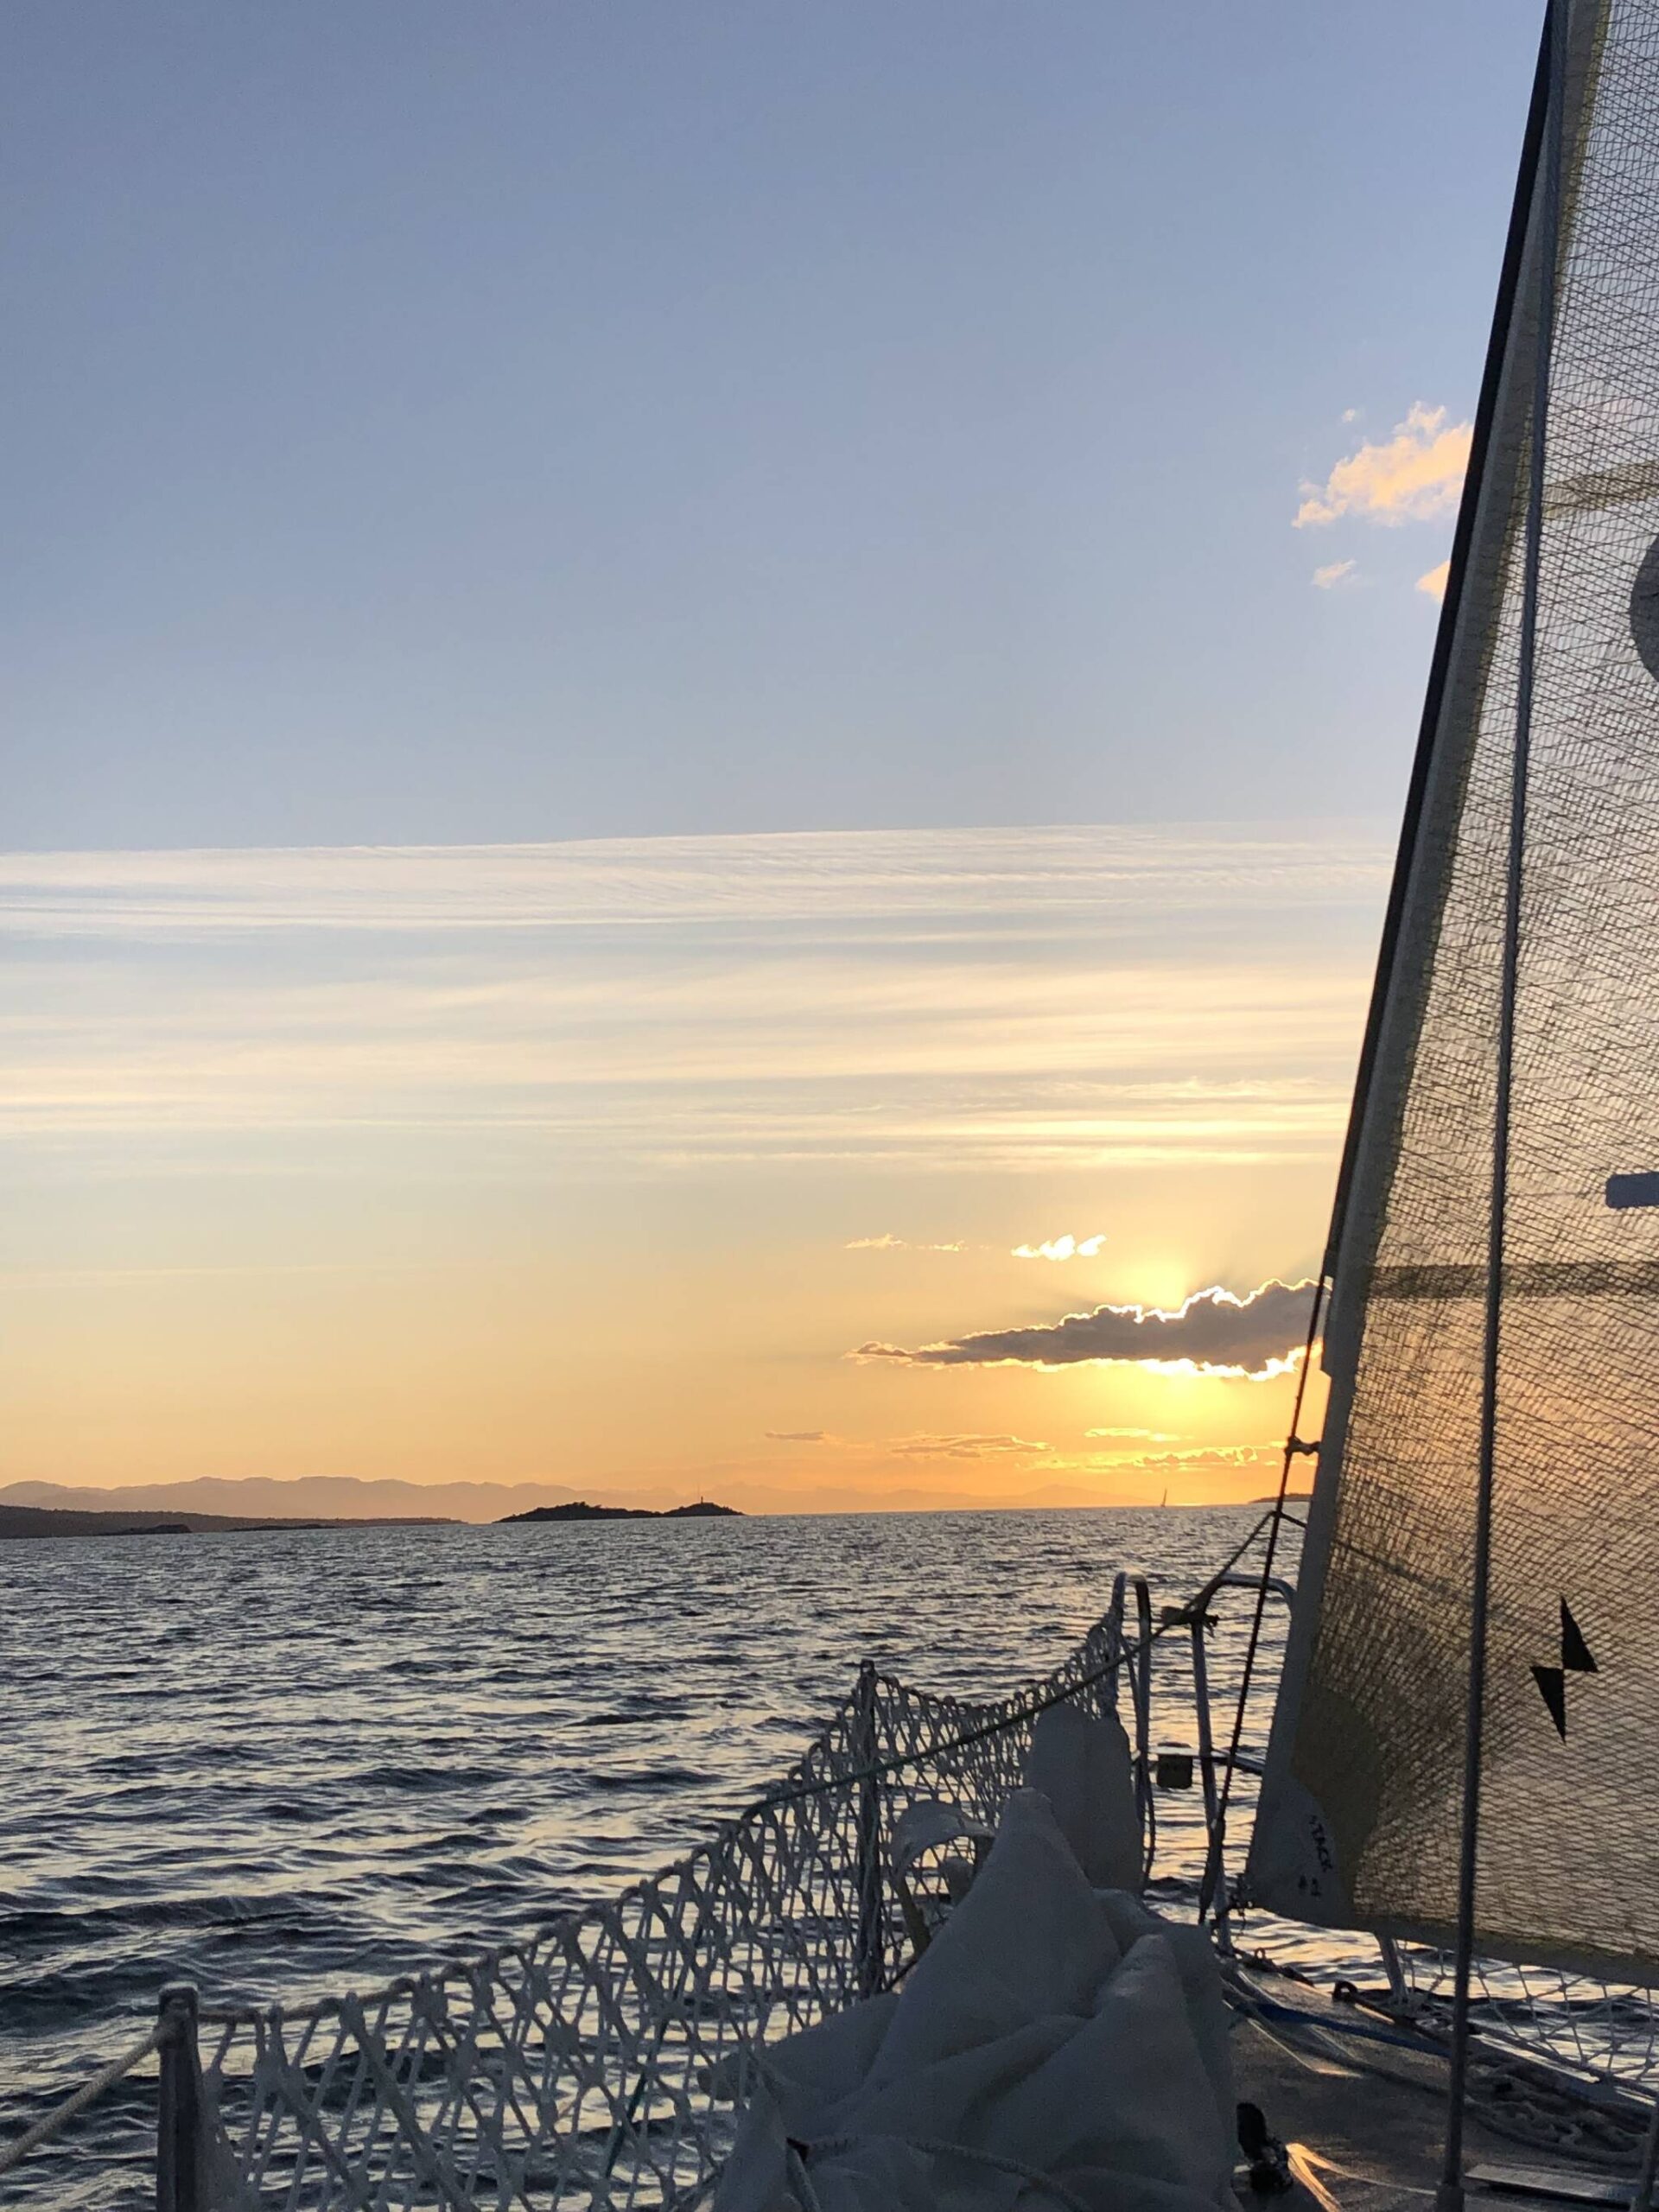 Sunset captured from the bow of the team’s boat, Loose Cannon, during the race
Submitted photo